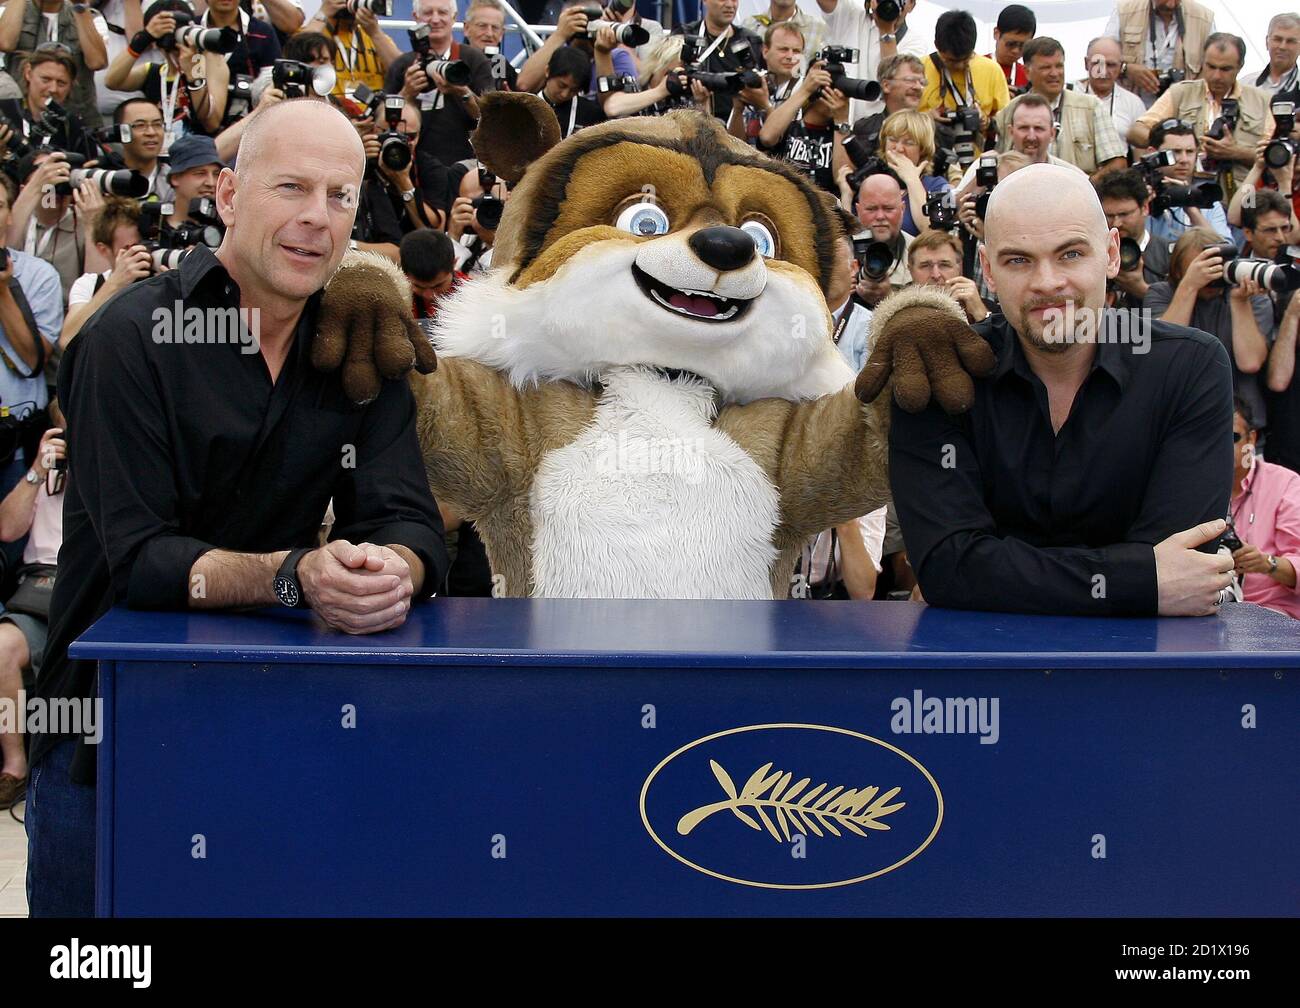 Cast members . actor Bruce Willis (L) and French actor Clovis Cornillac  attend a photocall for directors [Karey Kirkpatrick and Tim Johnson's] out  of competition animated film 'Over the Hedge' at the